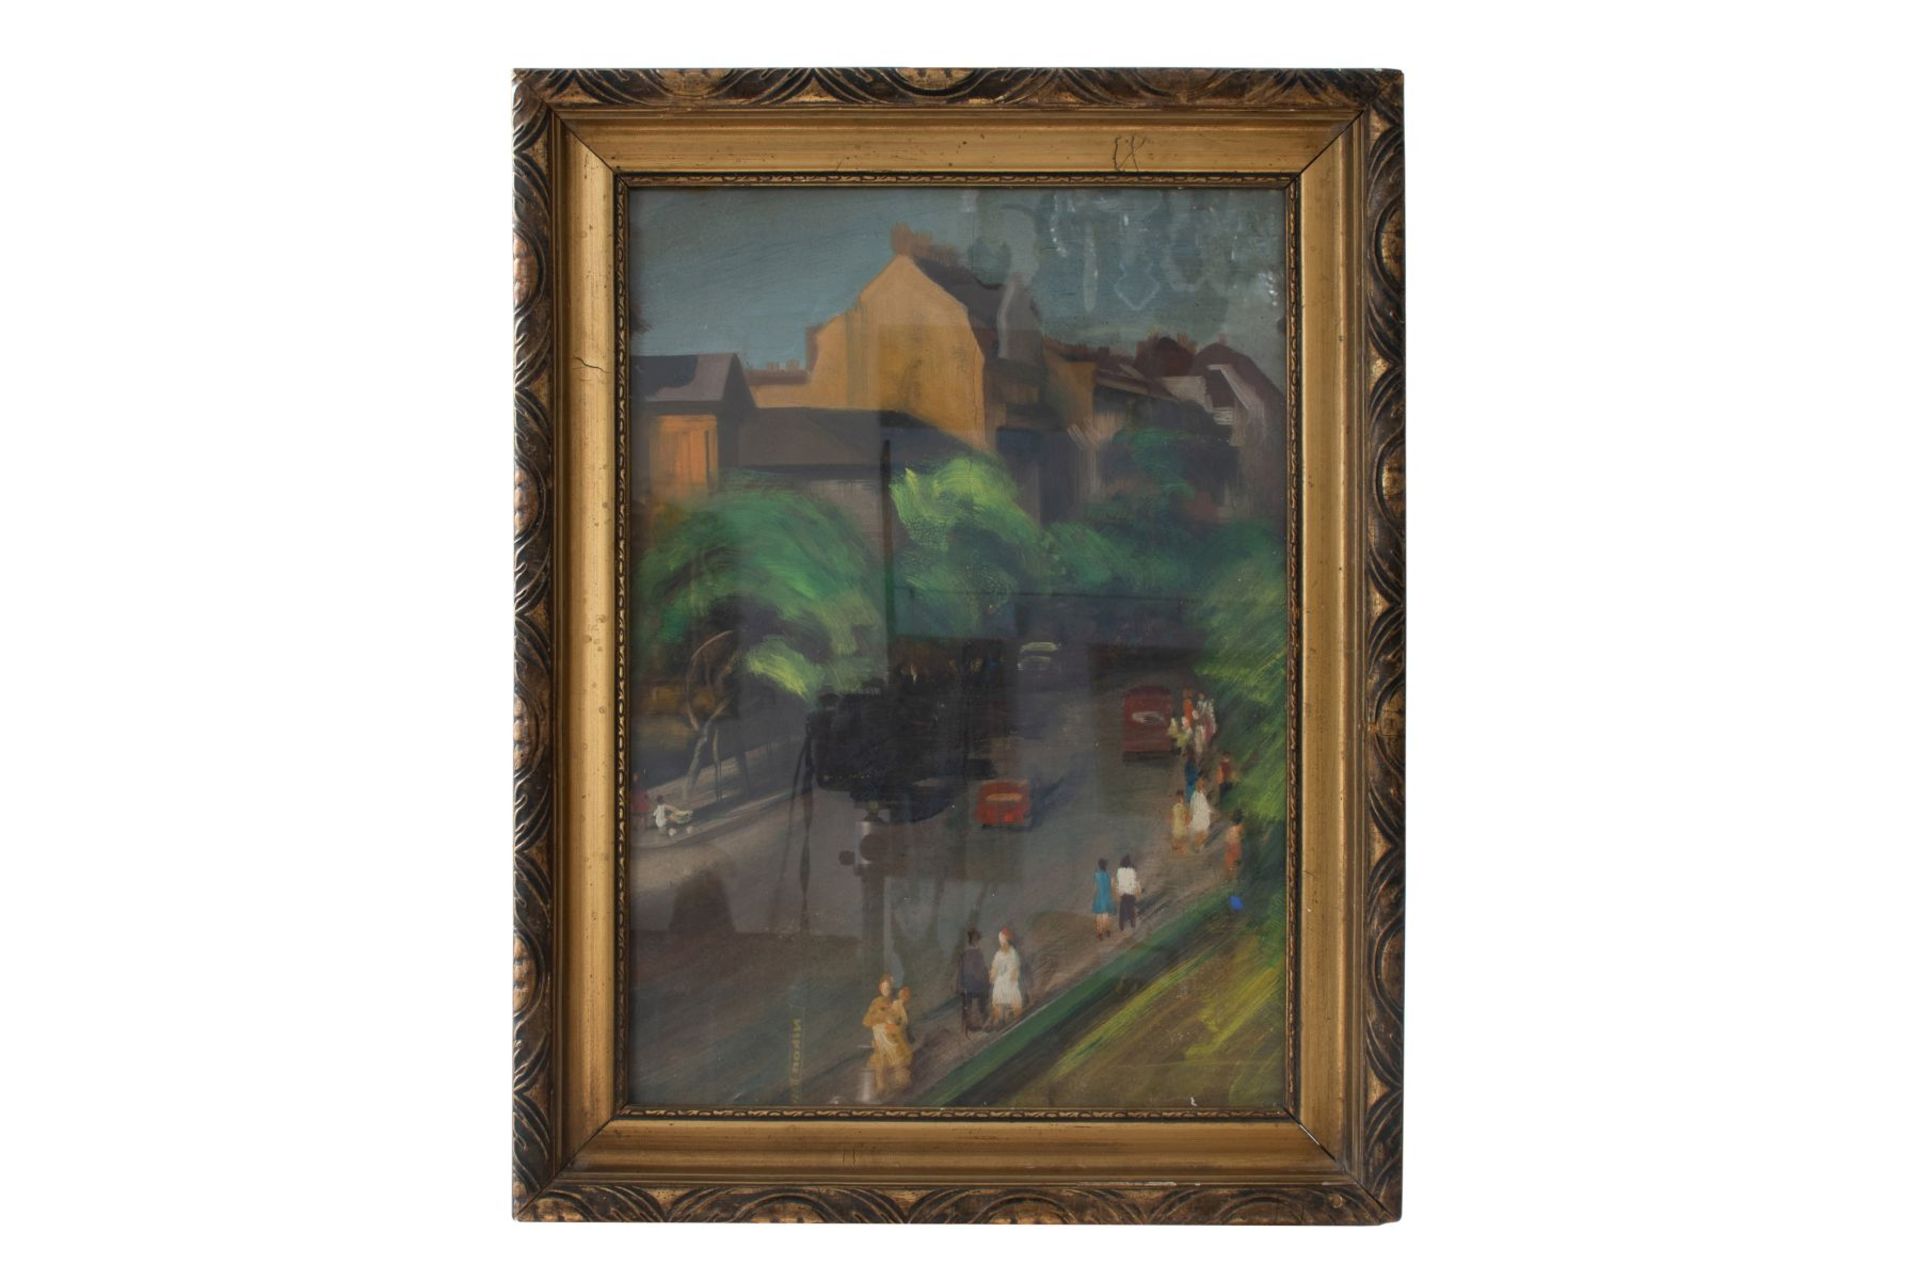 Artists of the 20th century " Street with vehicles and people".